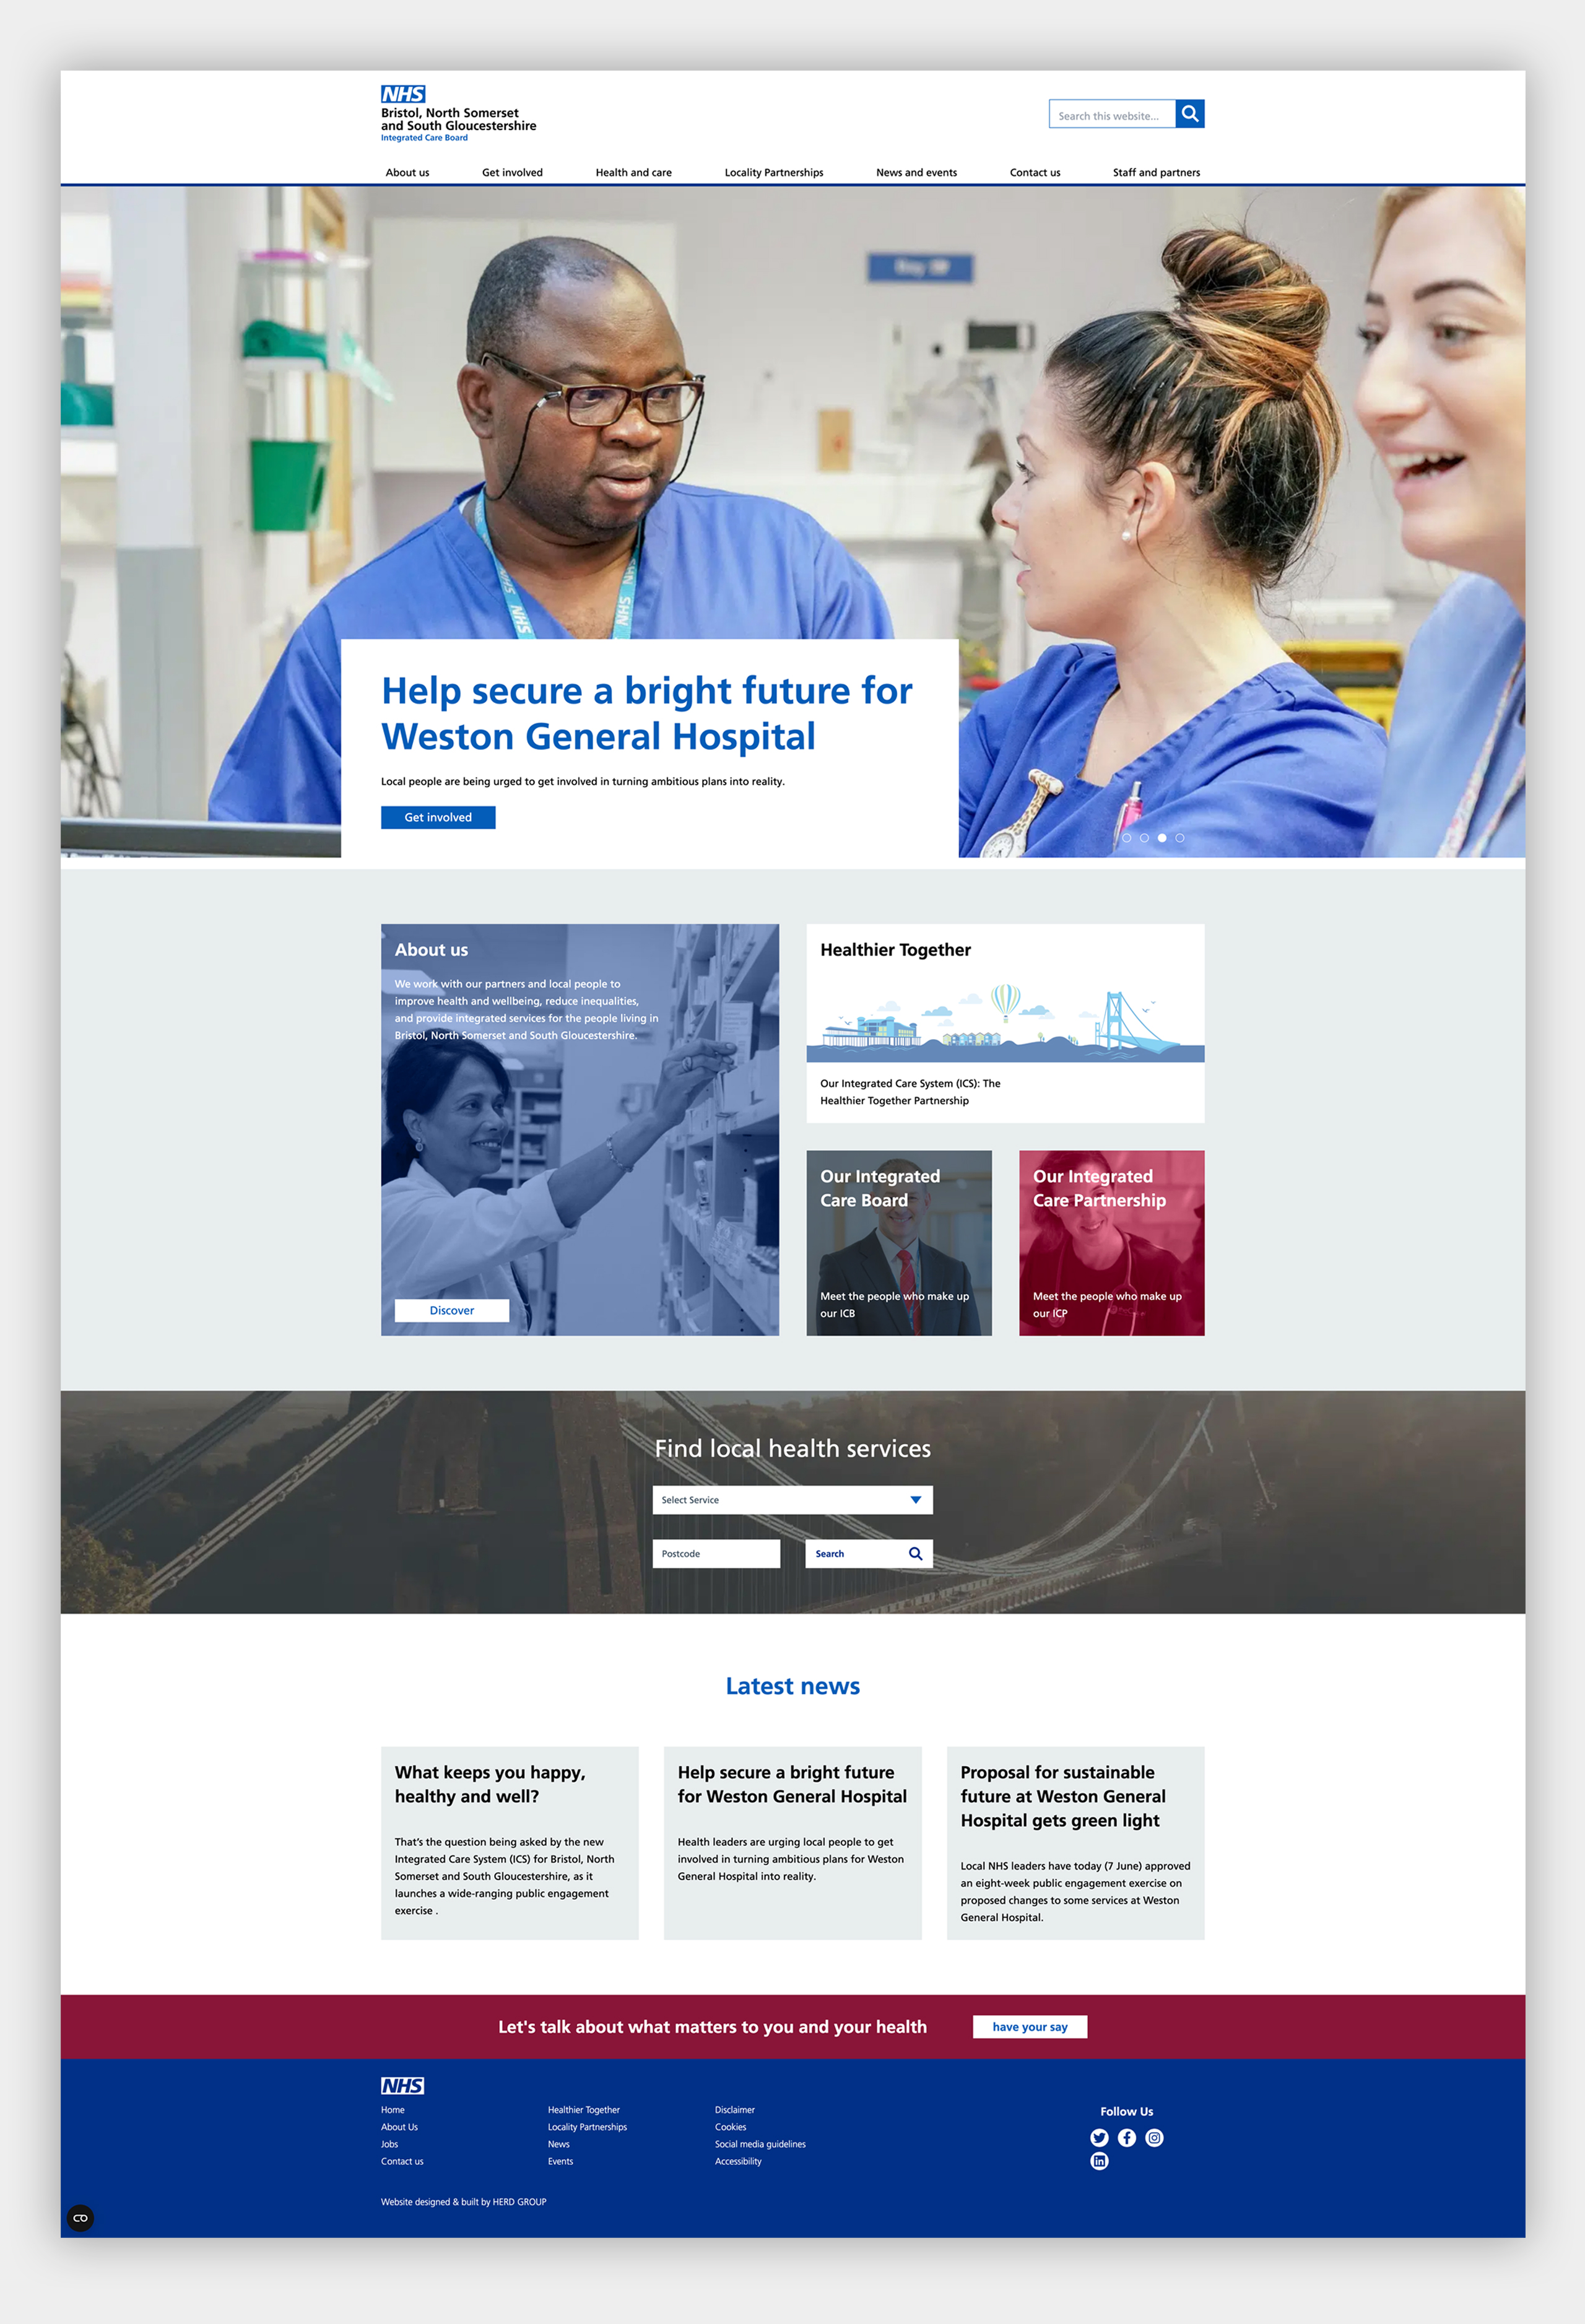 An image to show a page of the website. Three medical staff are interacting, along with an infographic and some news articles.